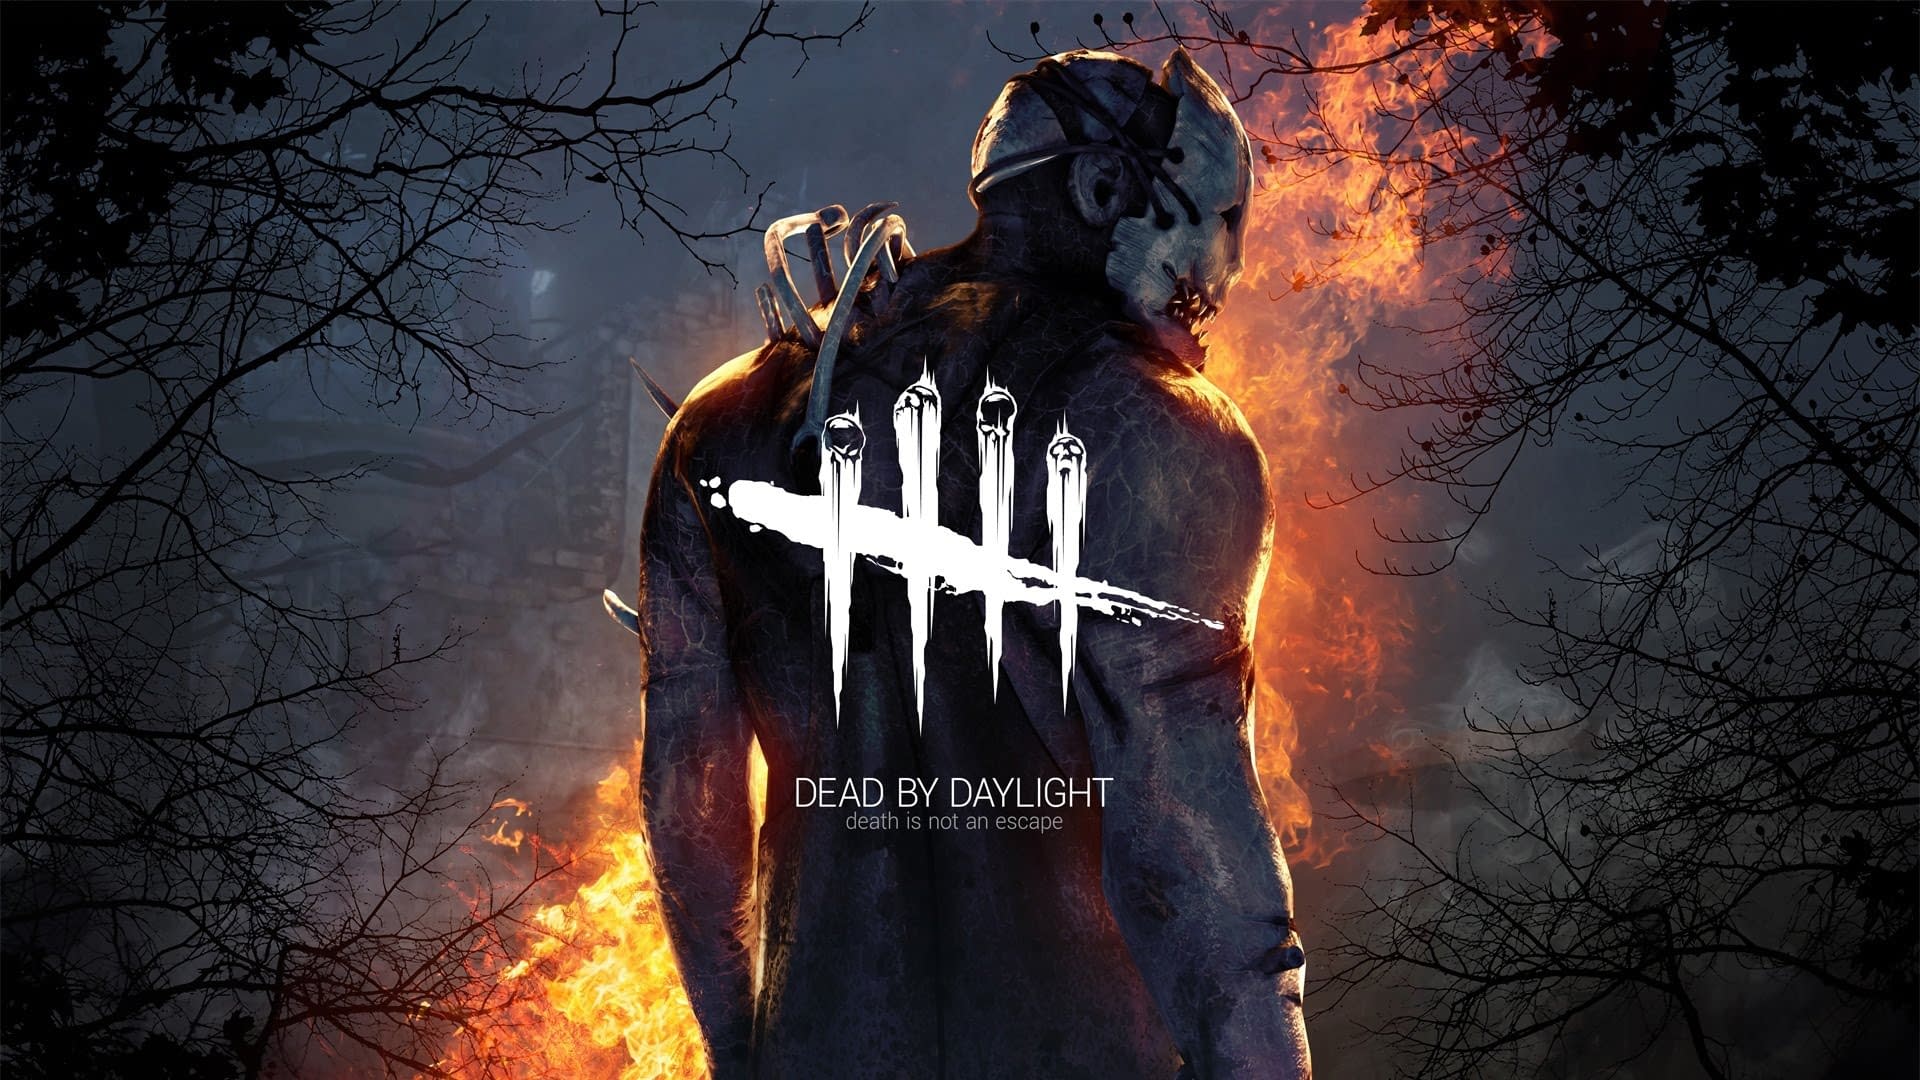 More than one project is developed in the Dead by Daylight universe: Film adaptation also comes